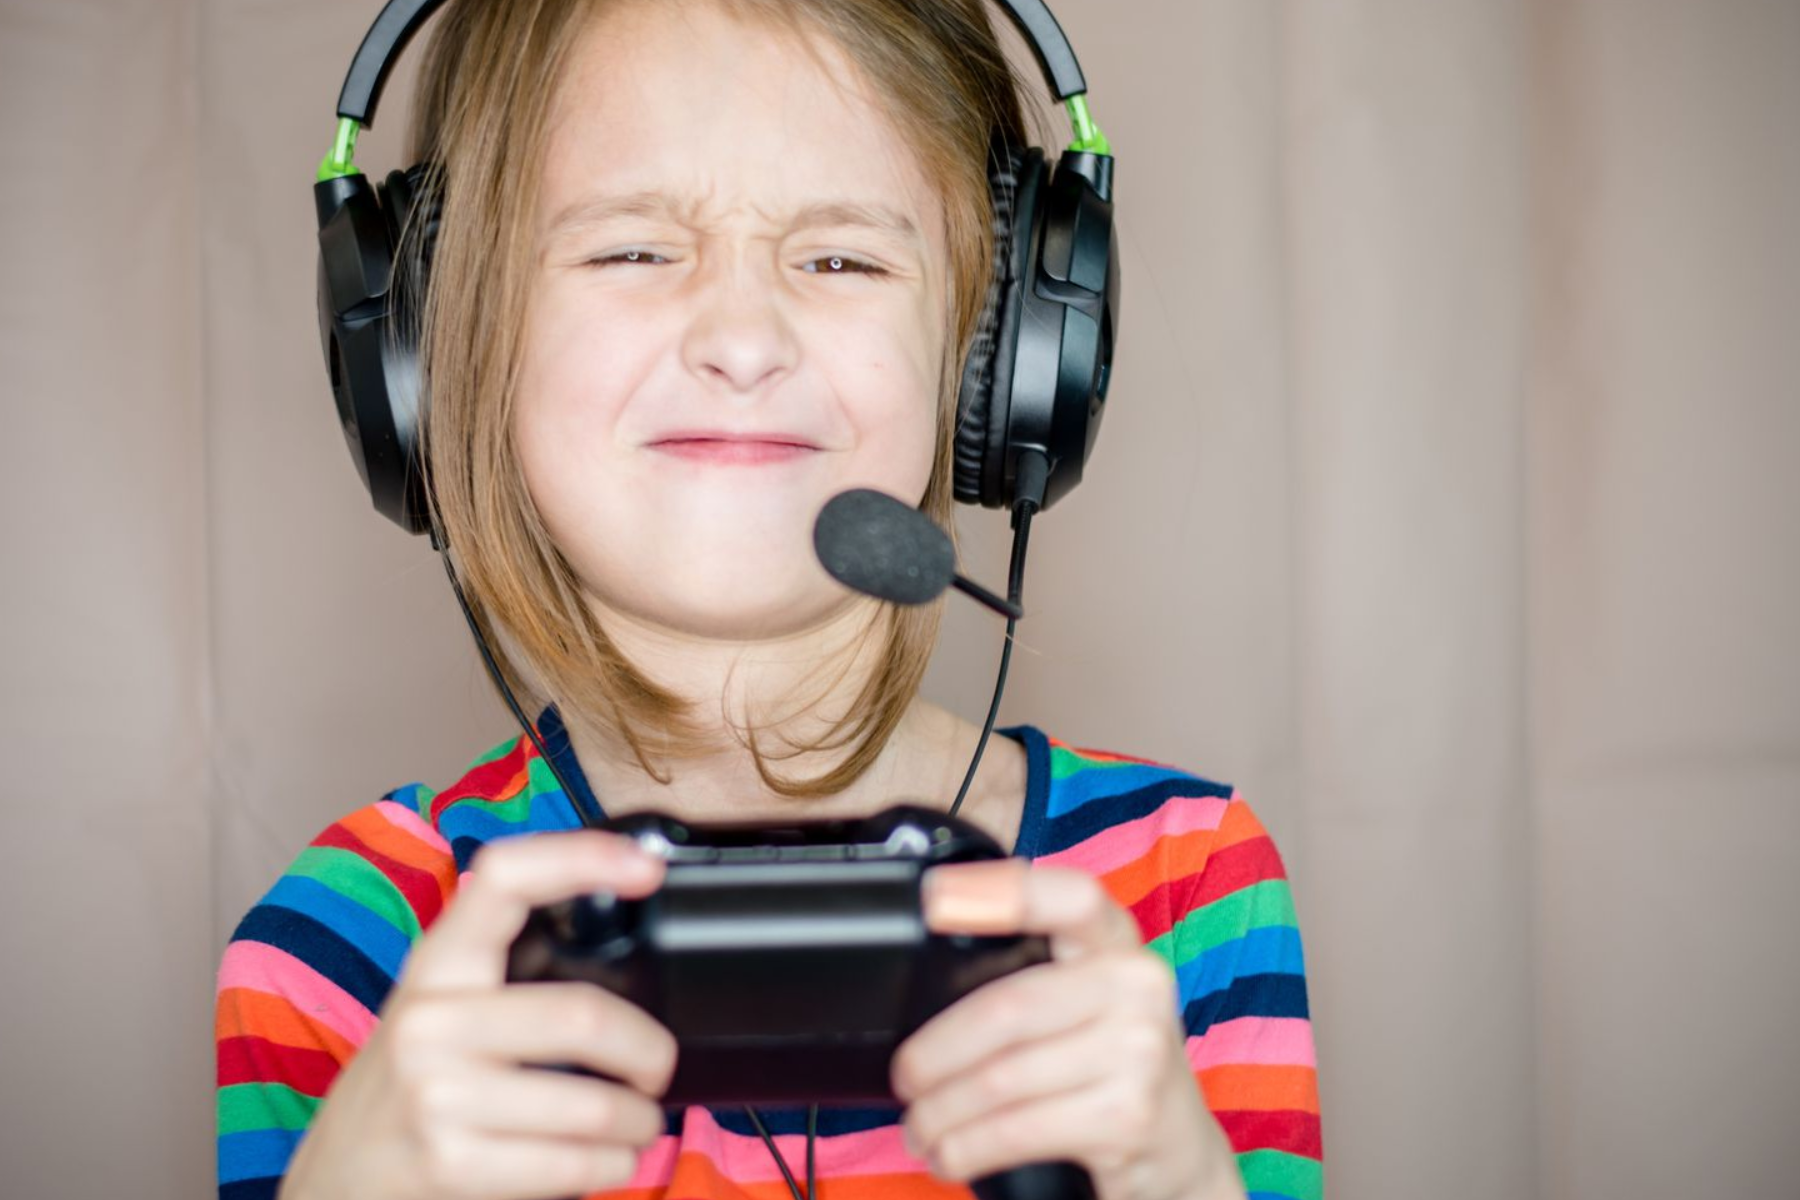 A young girl is seen playing an Xbox One while wearing regular mic headphones